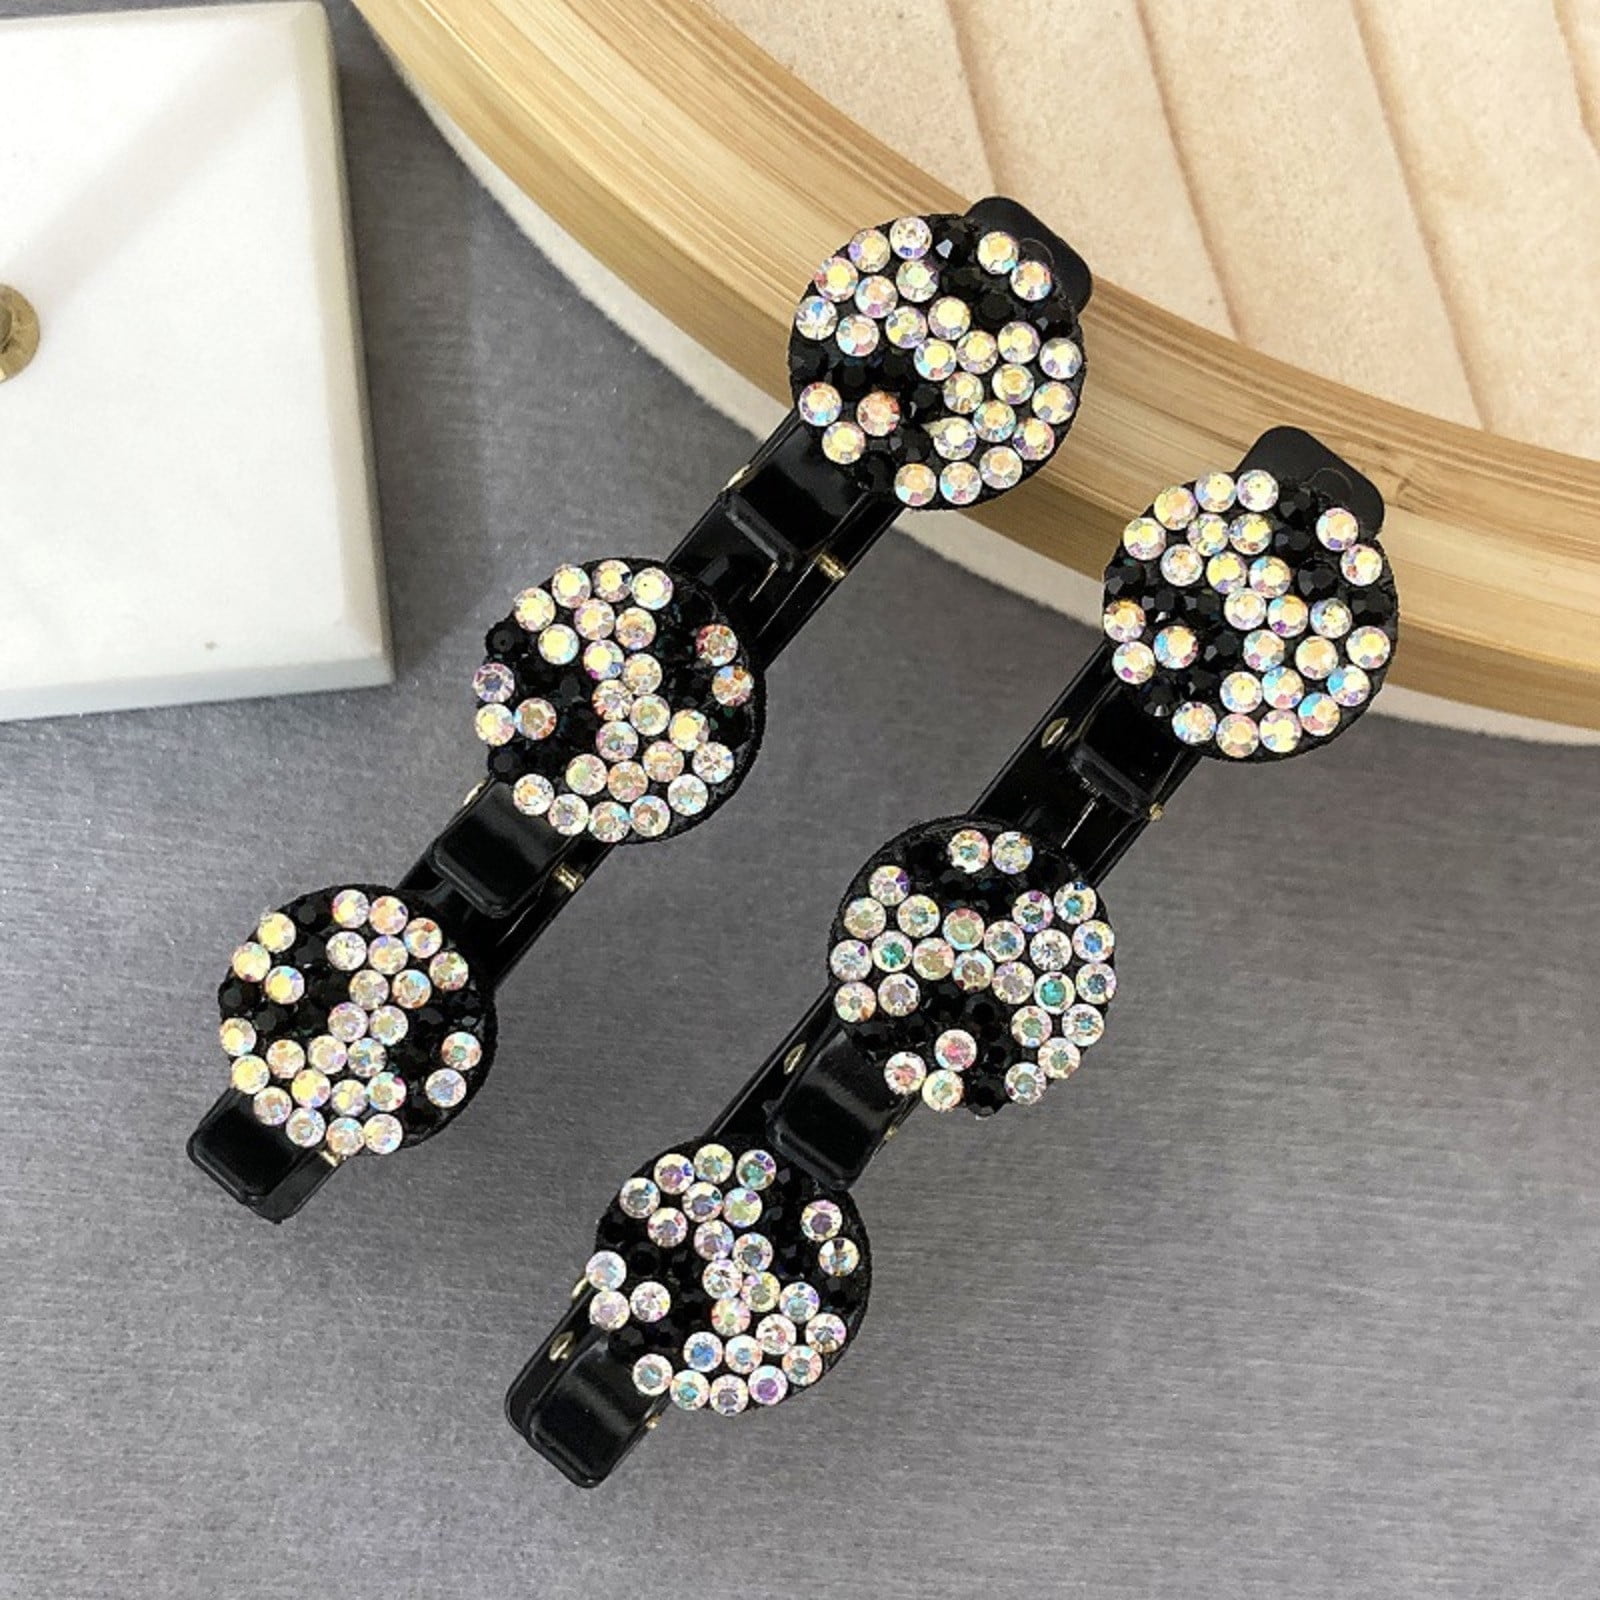 Pompotops Rhinestone Tassel Ponytail Hair Clips for Women Girls Buns Hair  Holder Large Glittering Hair Styling Claws Hair Pins Accessories 